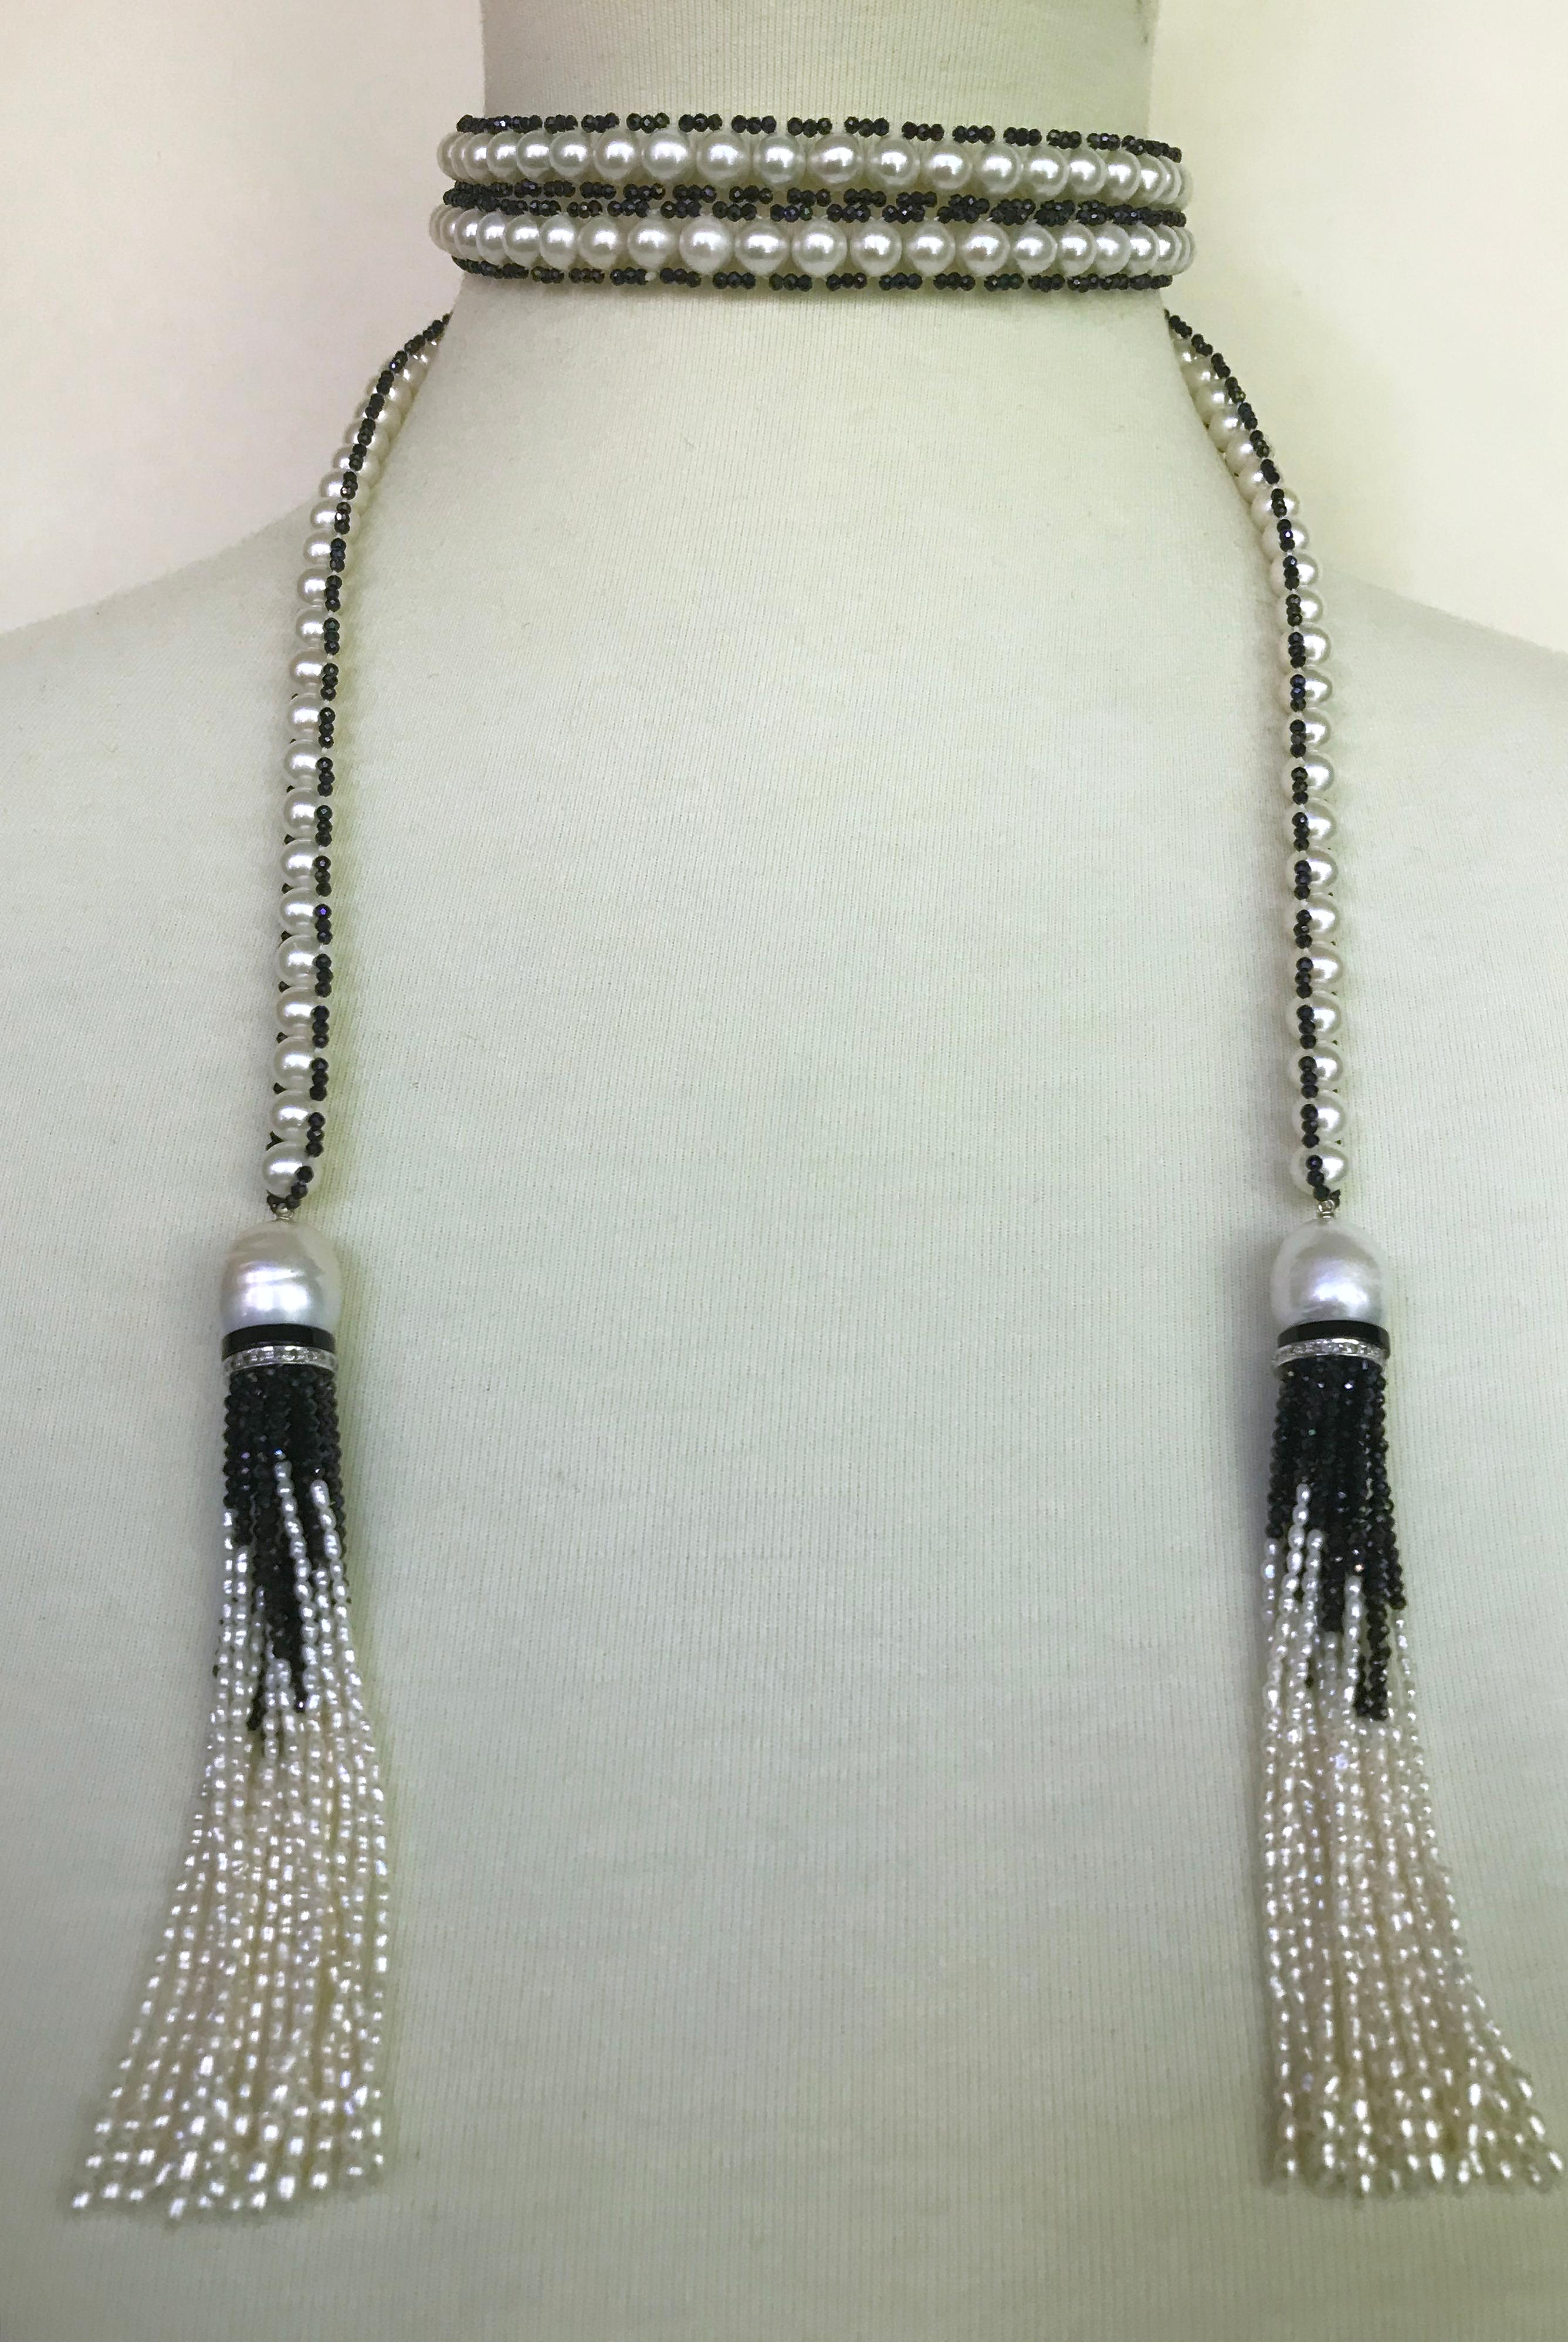 Marina J. presents a Black Spinel and Pearl woven sautoir with 14k White Gold Diamond encrusted roundel. This magnificent piece is intricately handwoven and it measures 50.5 inches in length. The pearl necklace is surrounded by the black spinel